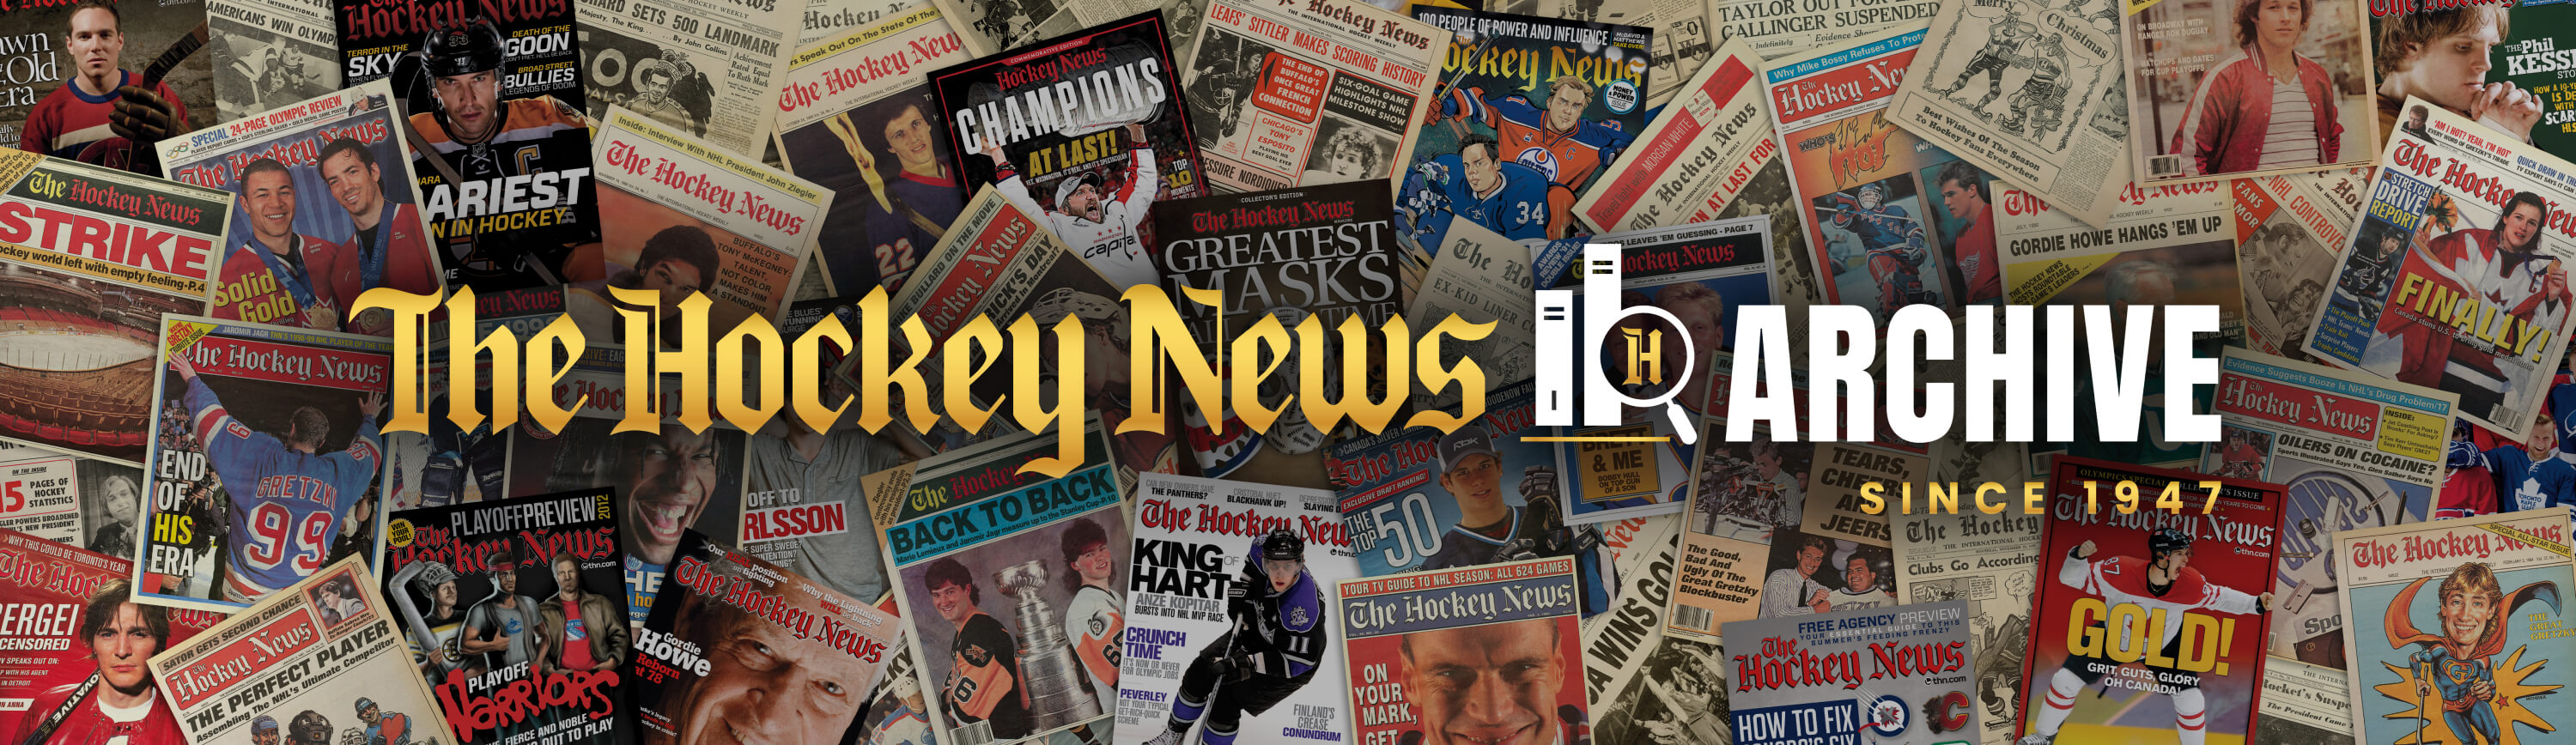 The Hockey News Archive From 1947 to Today